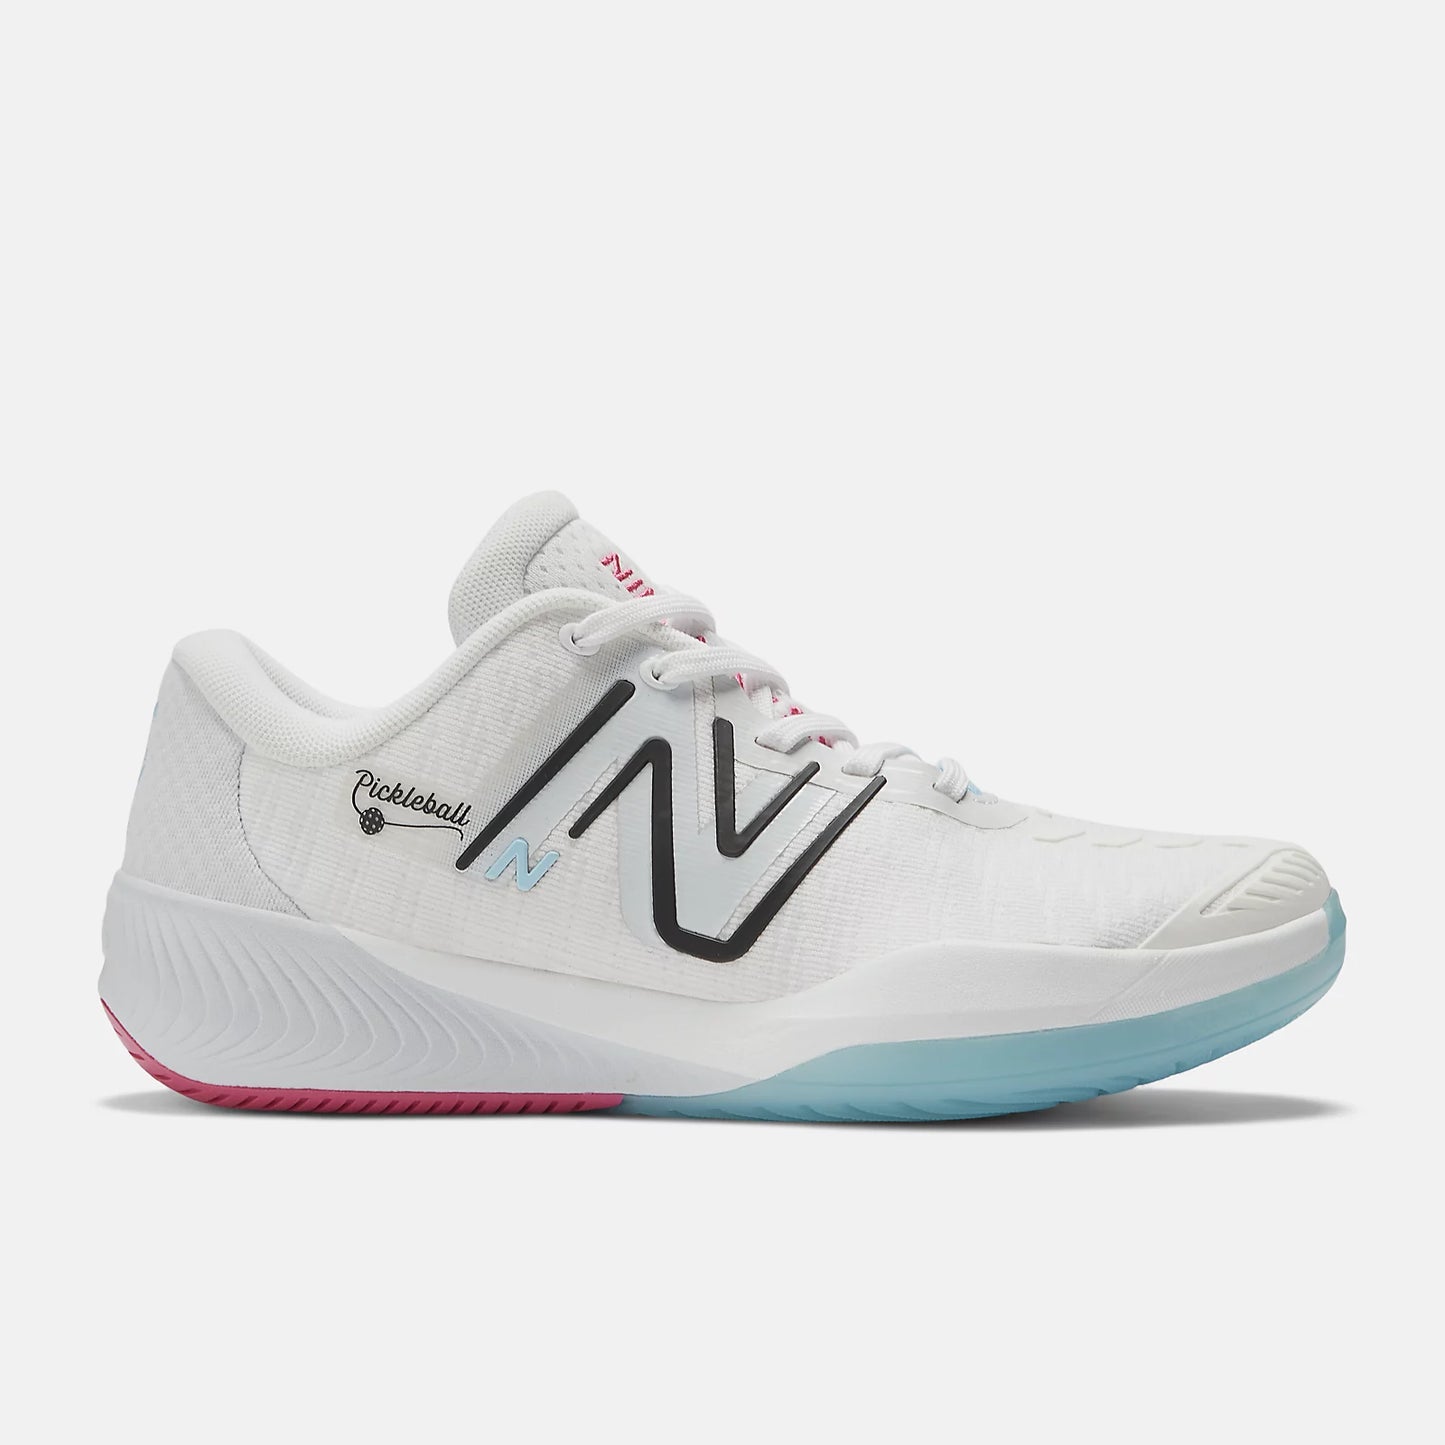 New Balance 996v5 Fuel Cell Pickle Ball Wmn